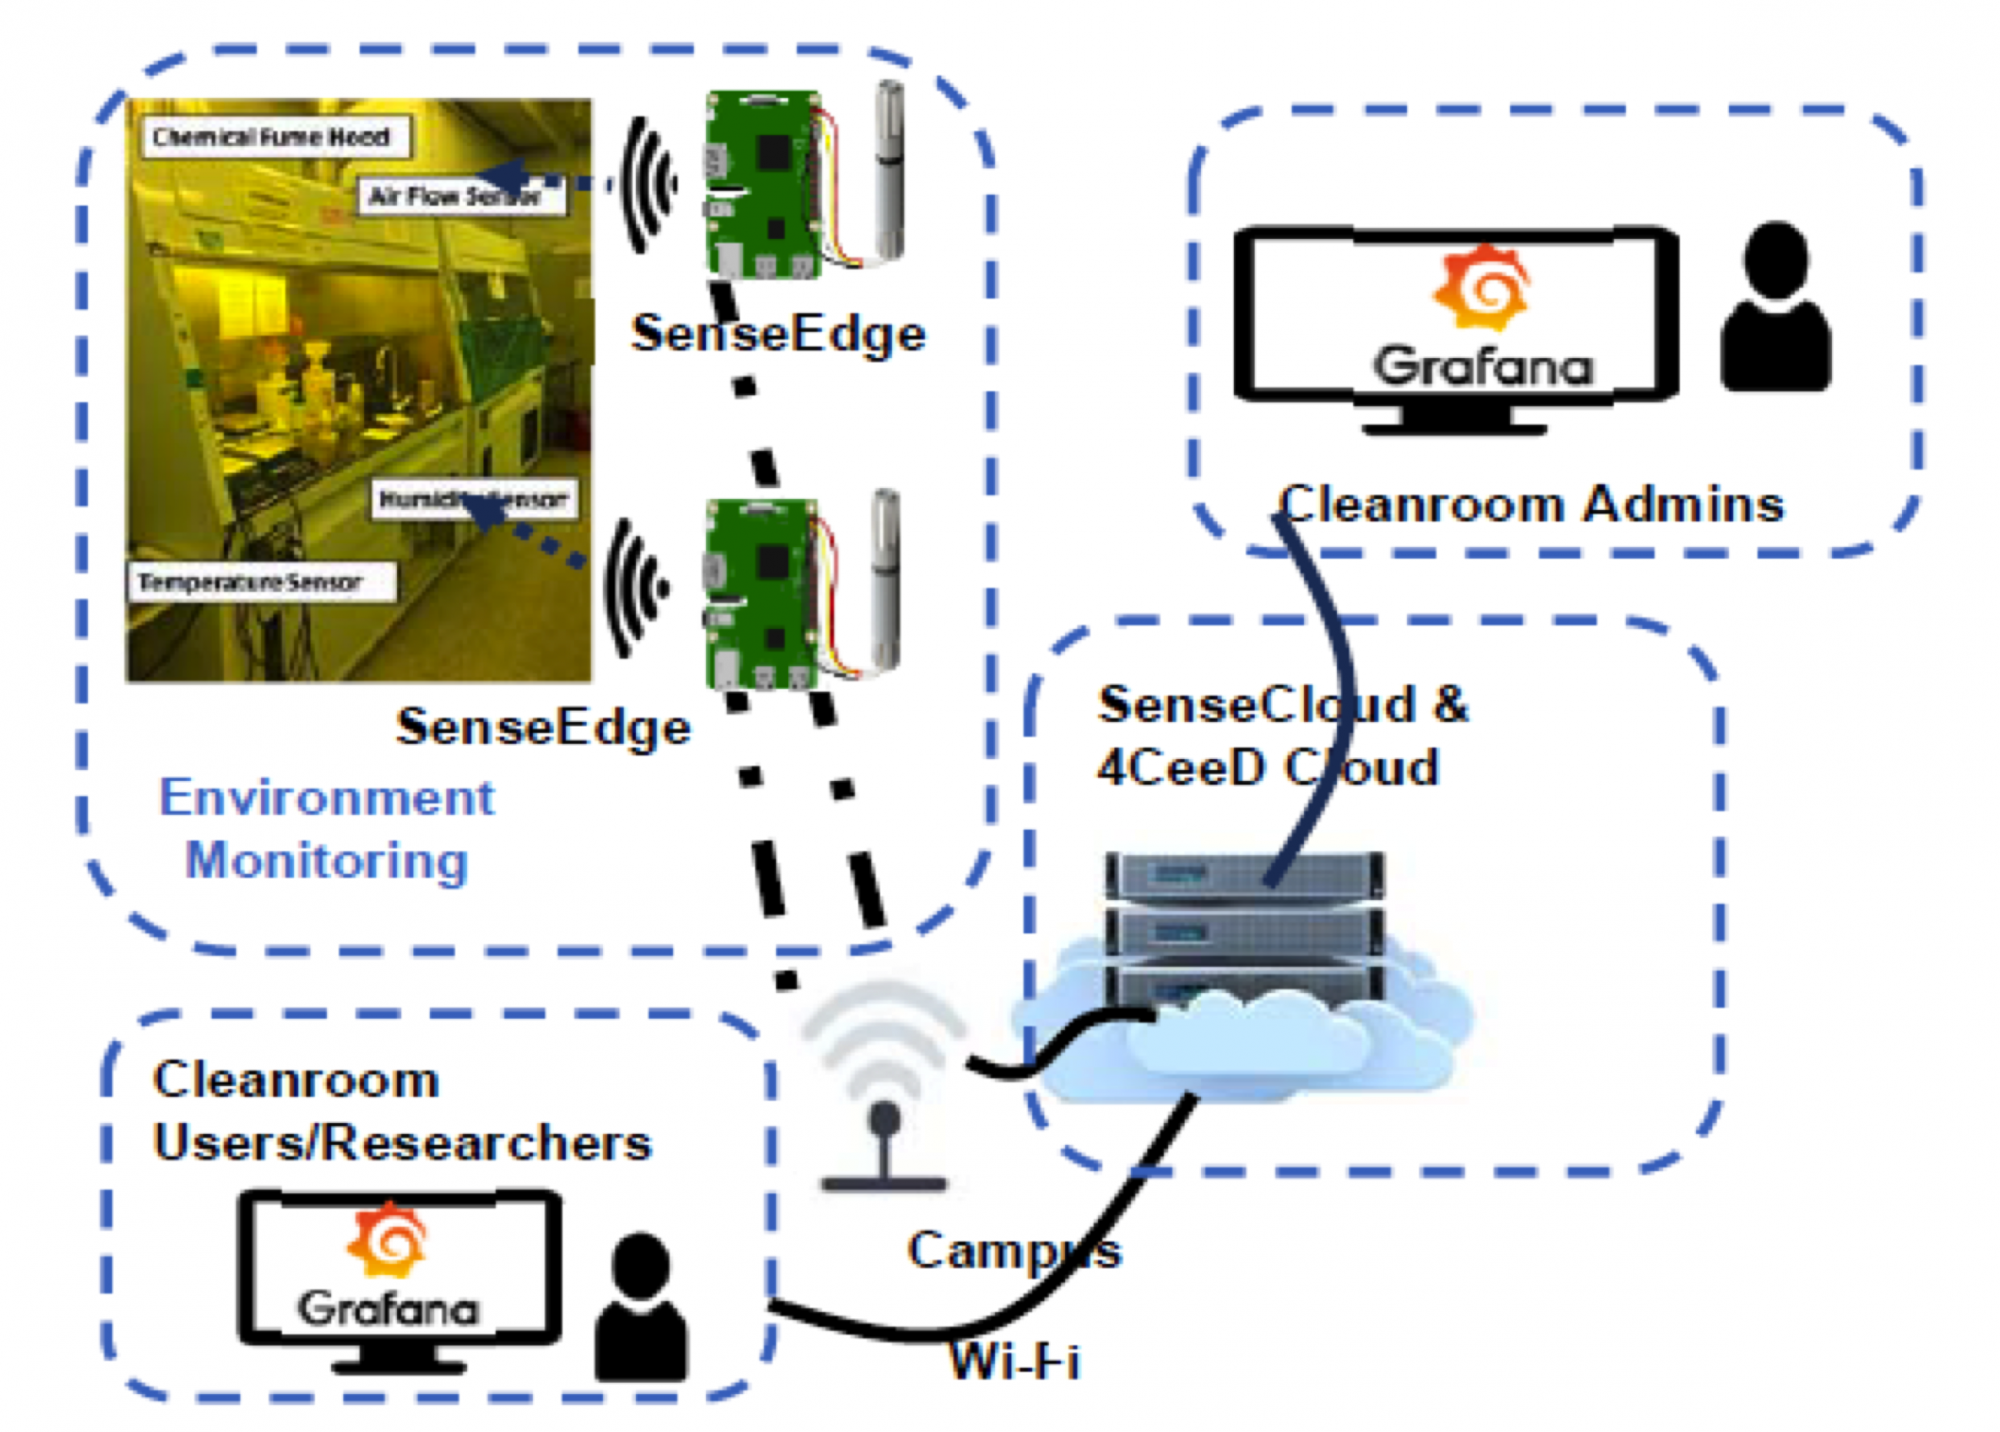 Figure 4: Sense-Compute Infrastructure for Cleanroom